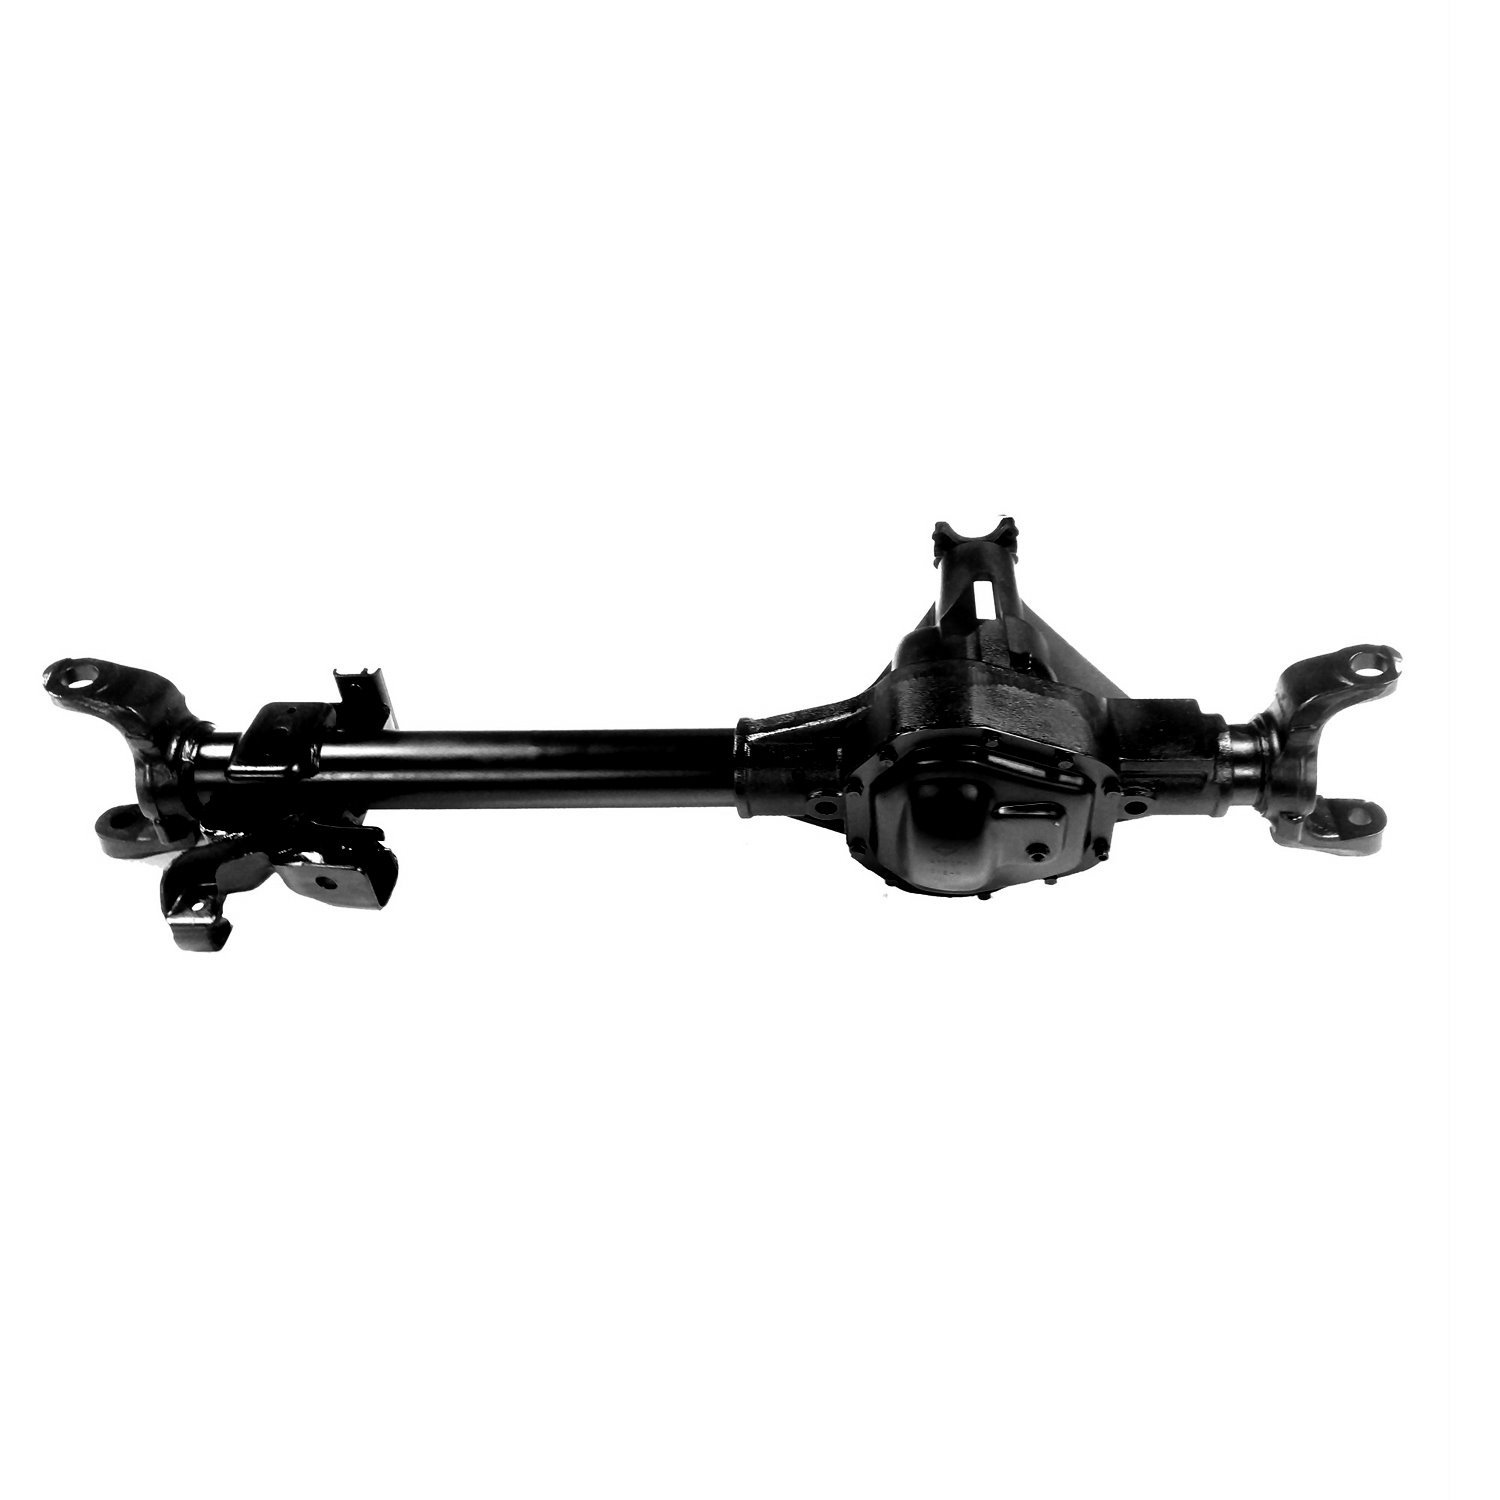 Remanufactured Complete Axle Assembly for Dana 60 08-09 Ford F350 3.73 Ratio, SRW